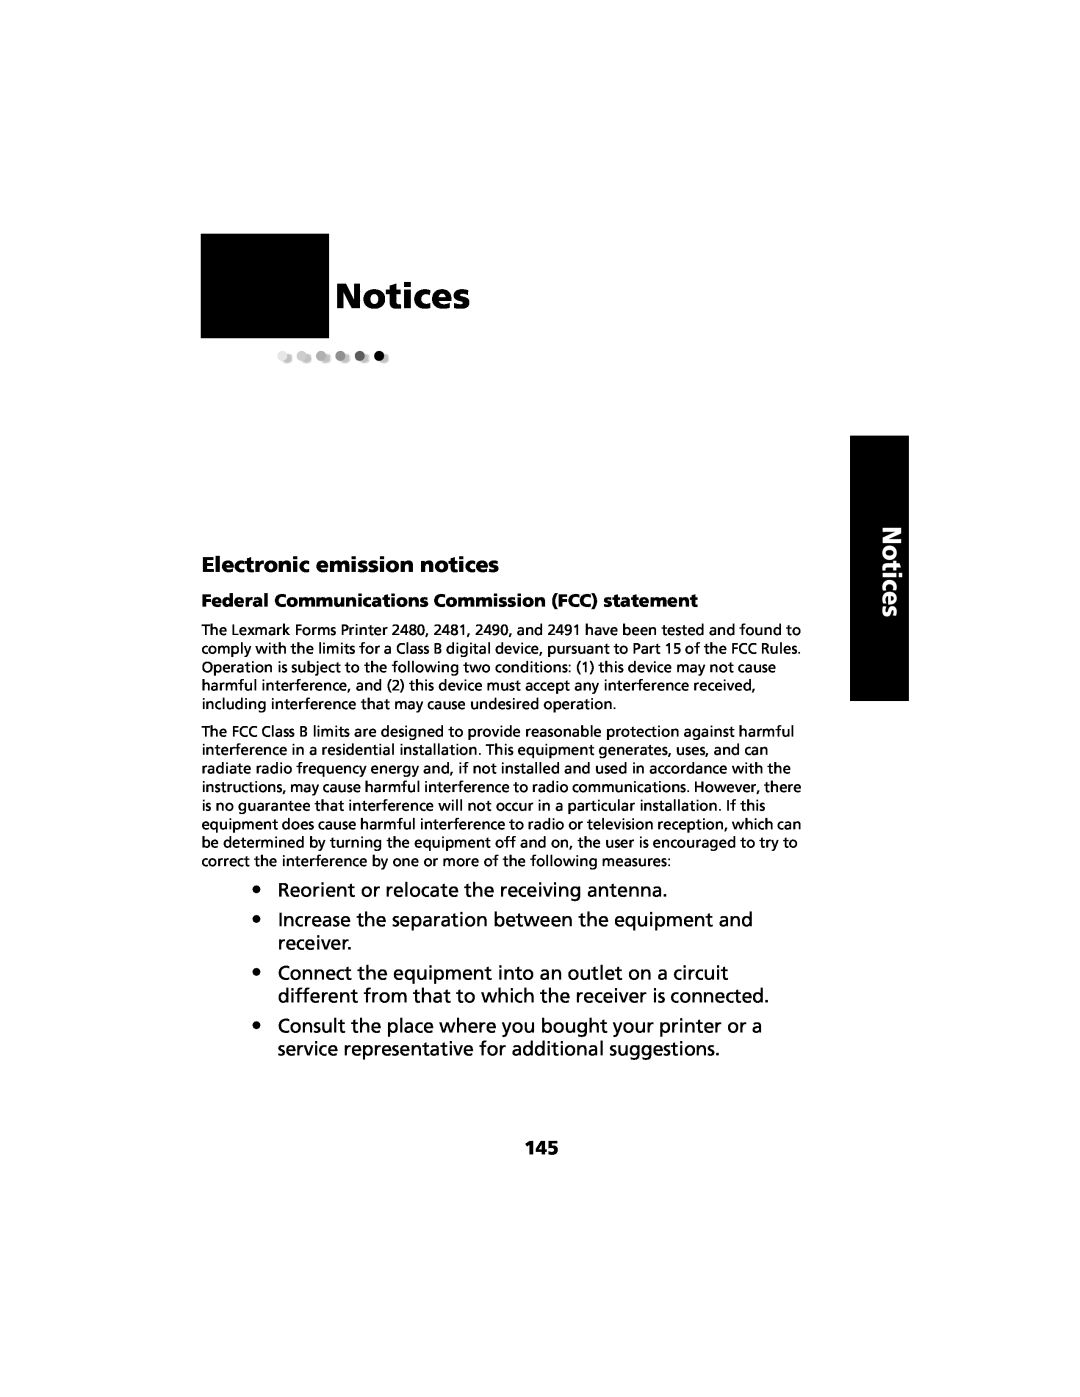 Lexmark 2480 manual Notices, Electronic emission notices 